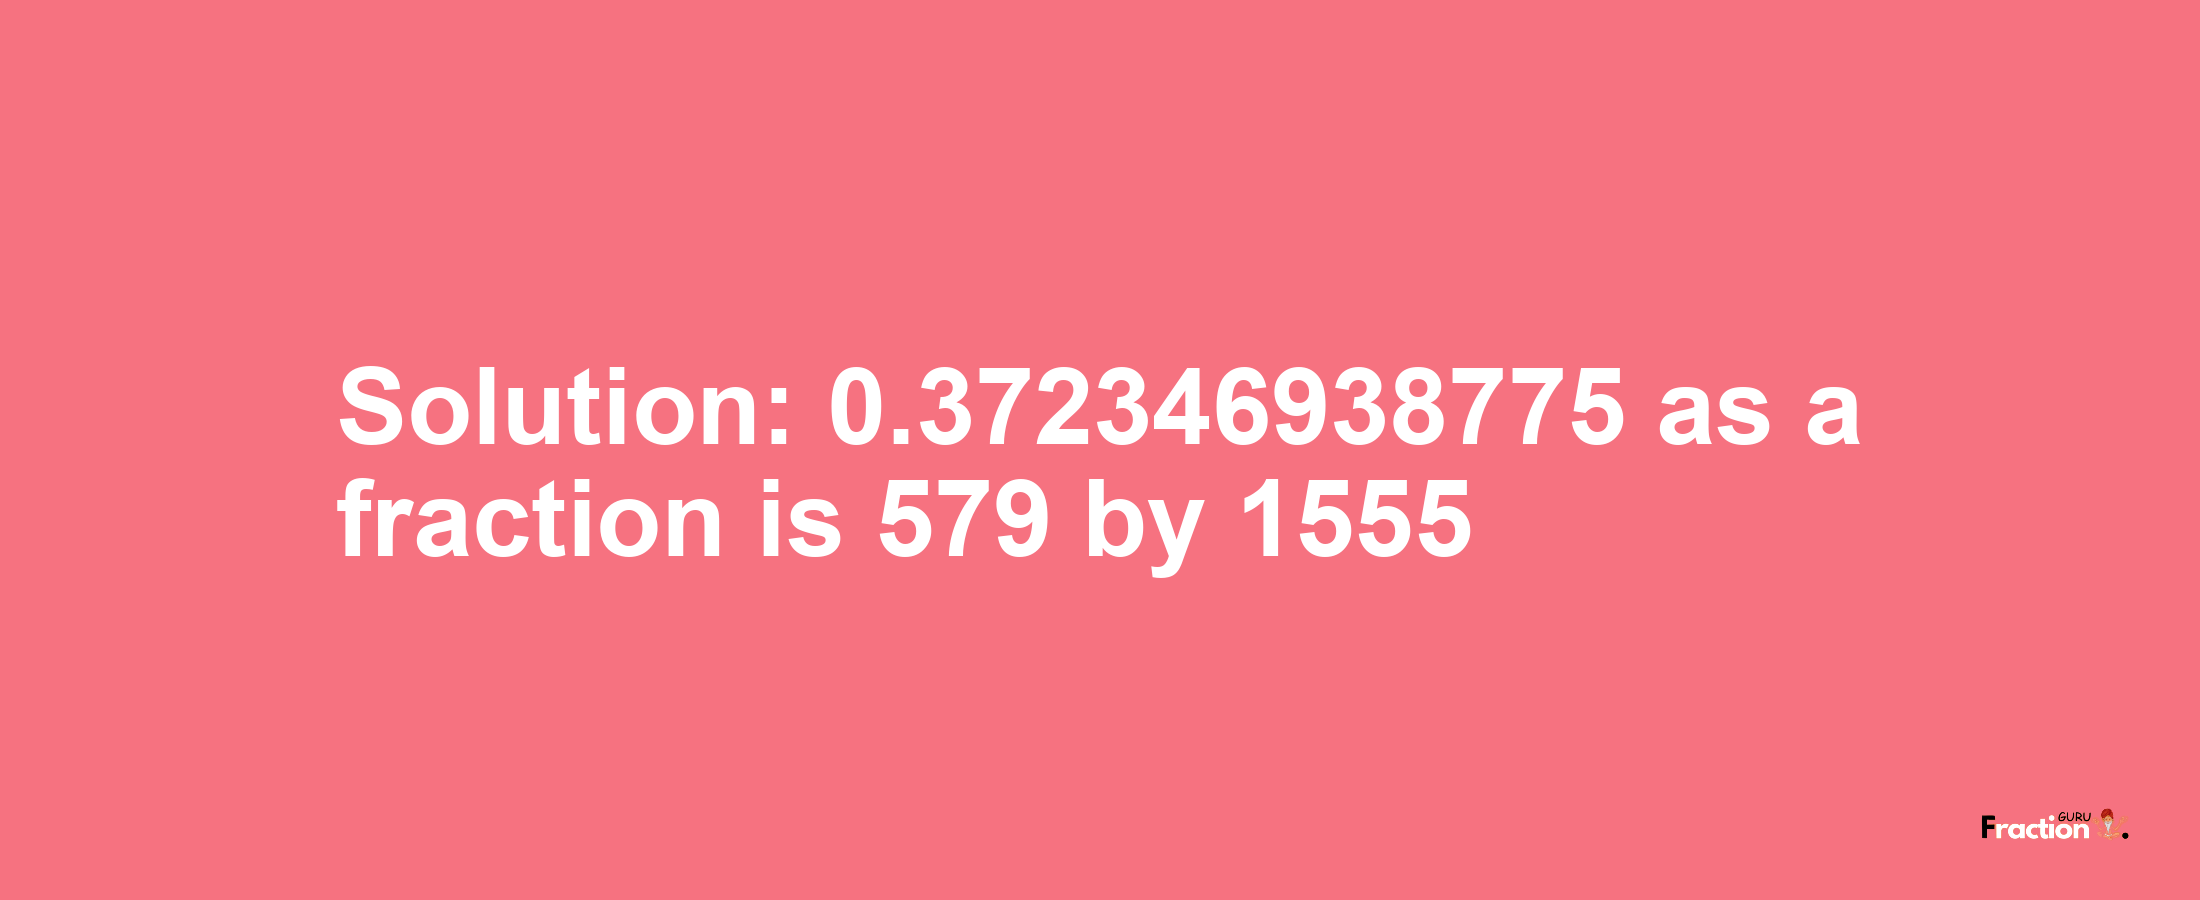 Solution:0.372346938775 as a fraction is 579/1555